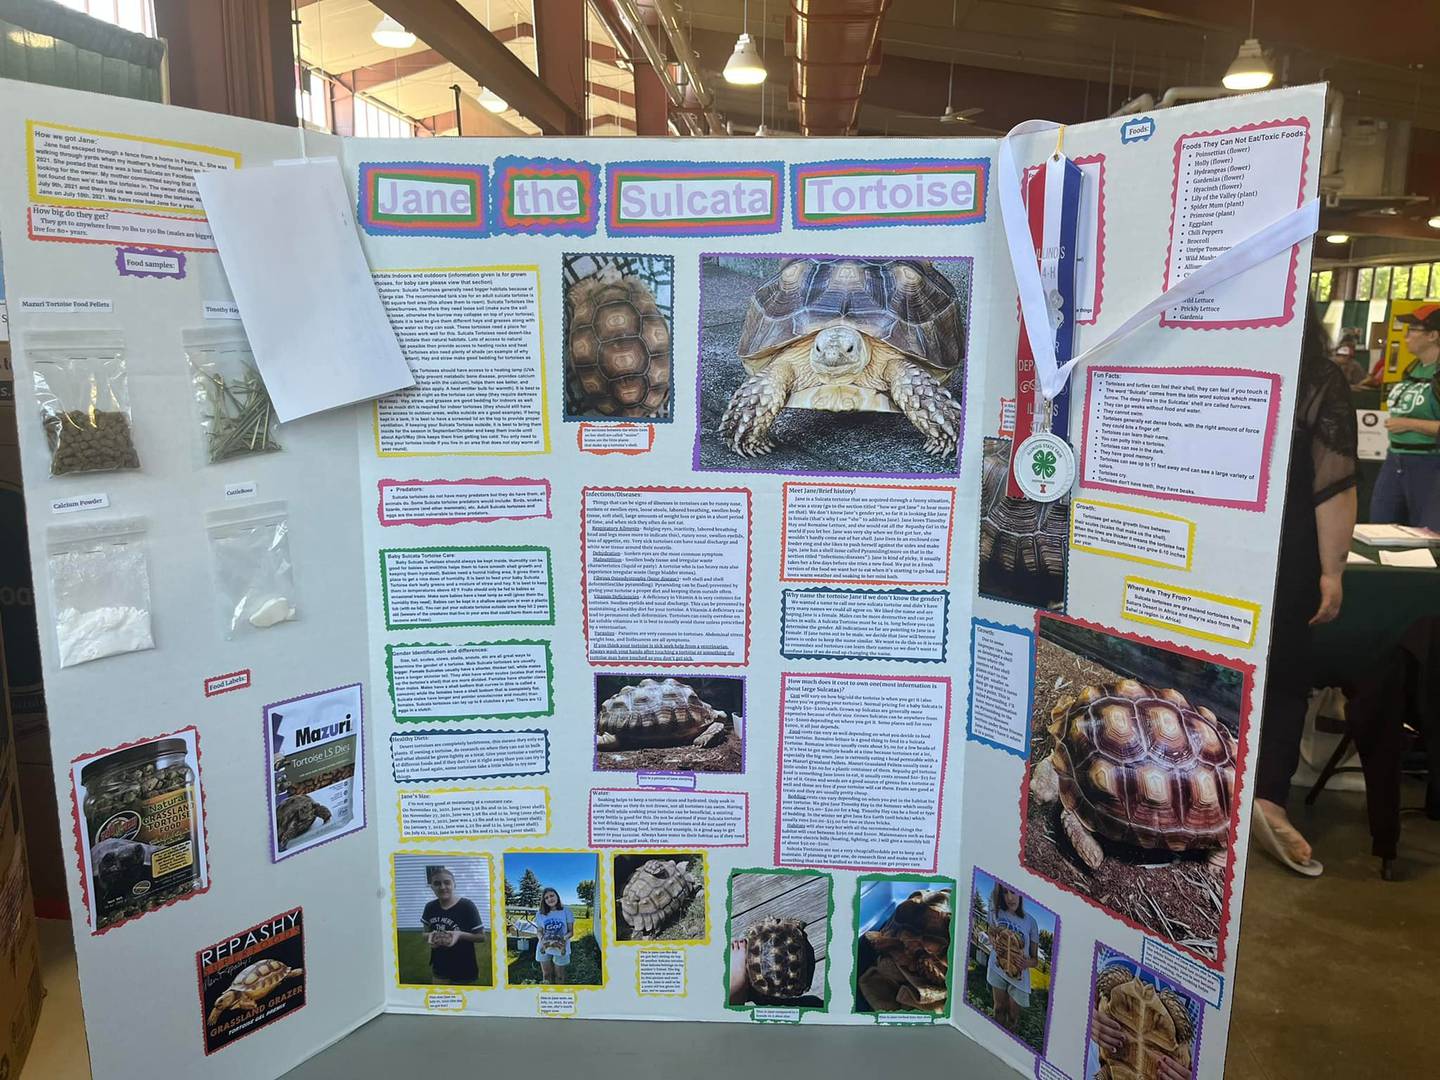 Inspire Award recipients Reese Aukes, Manlius Boys and Girls 4-H Club, and Anastasia Sondgeroth, Zearing 4-H Club, presented their projects in Animal Science